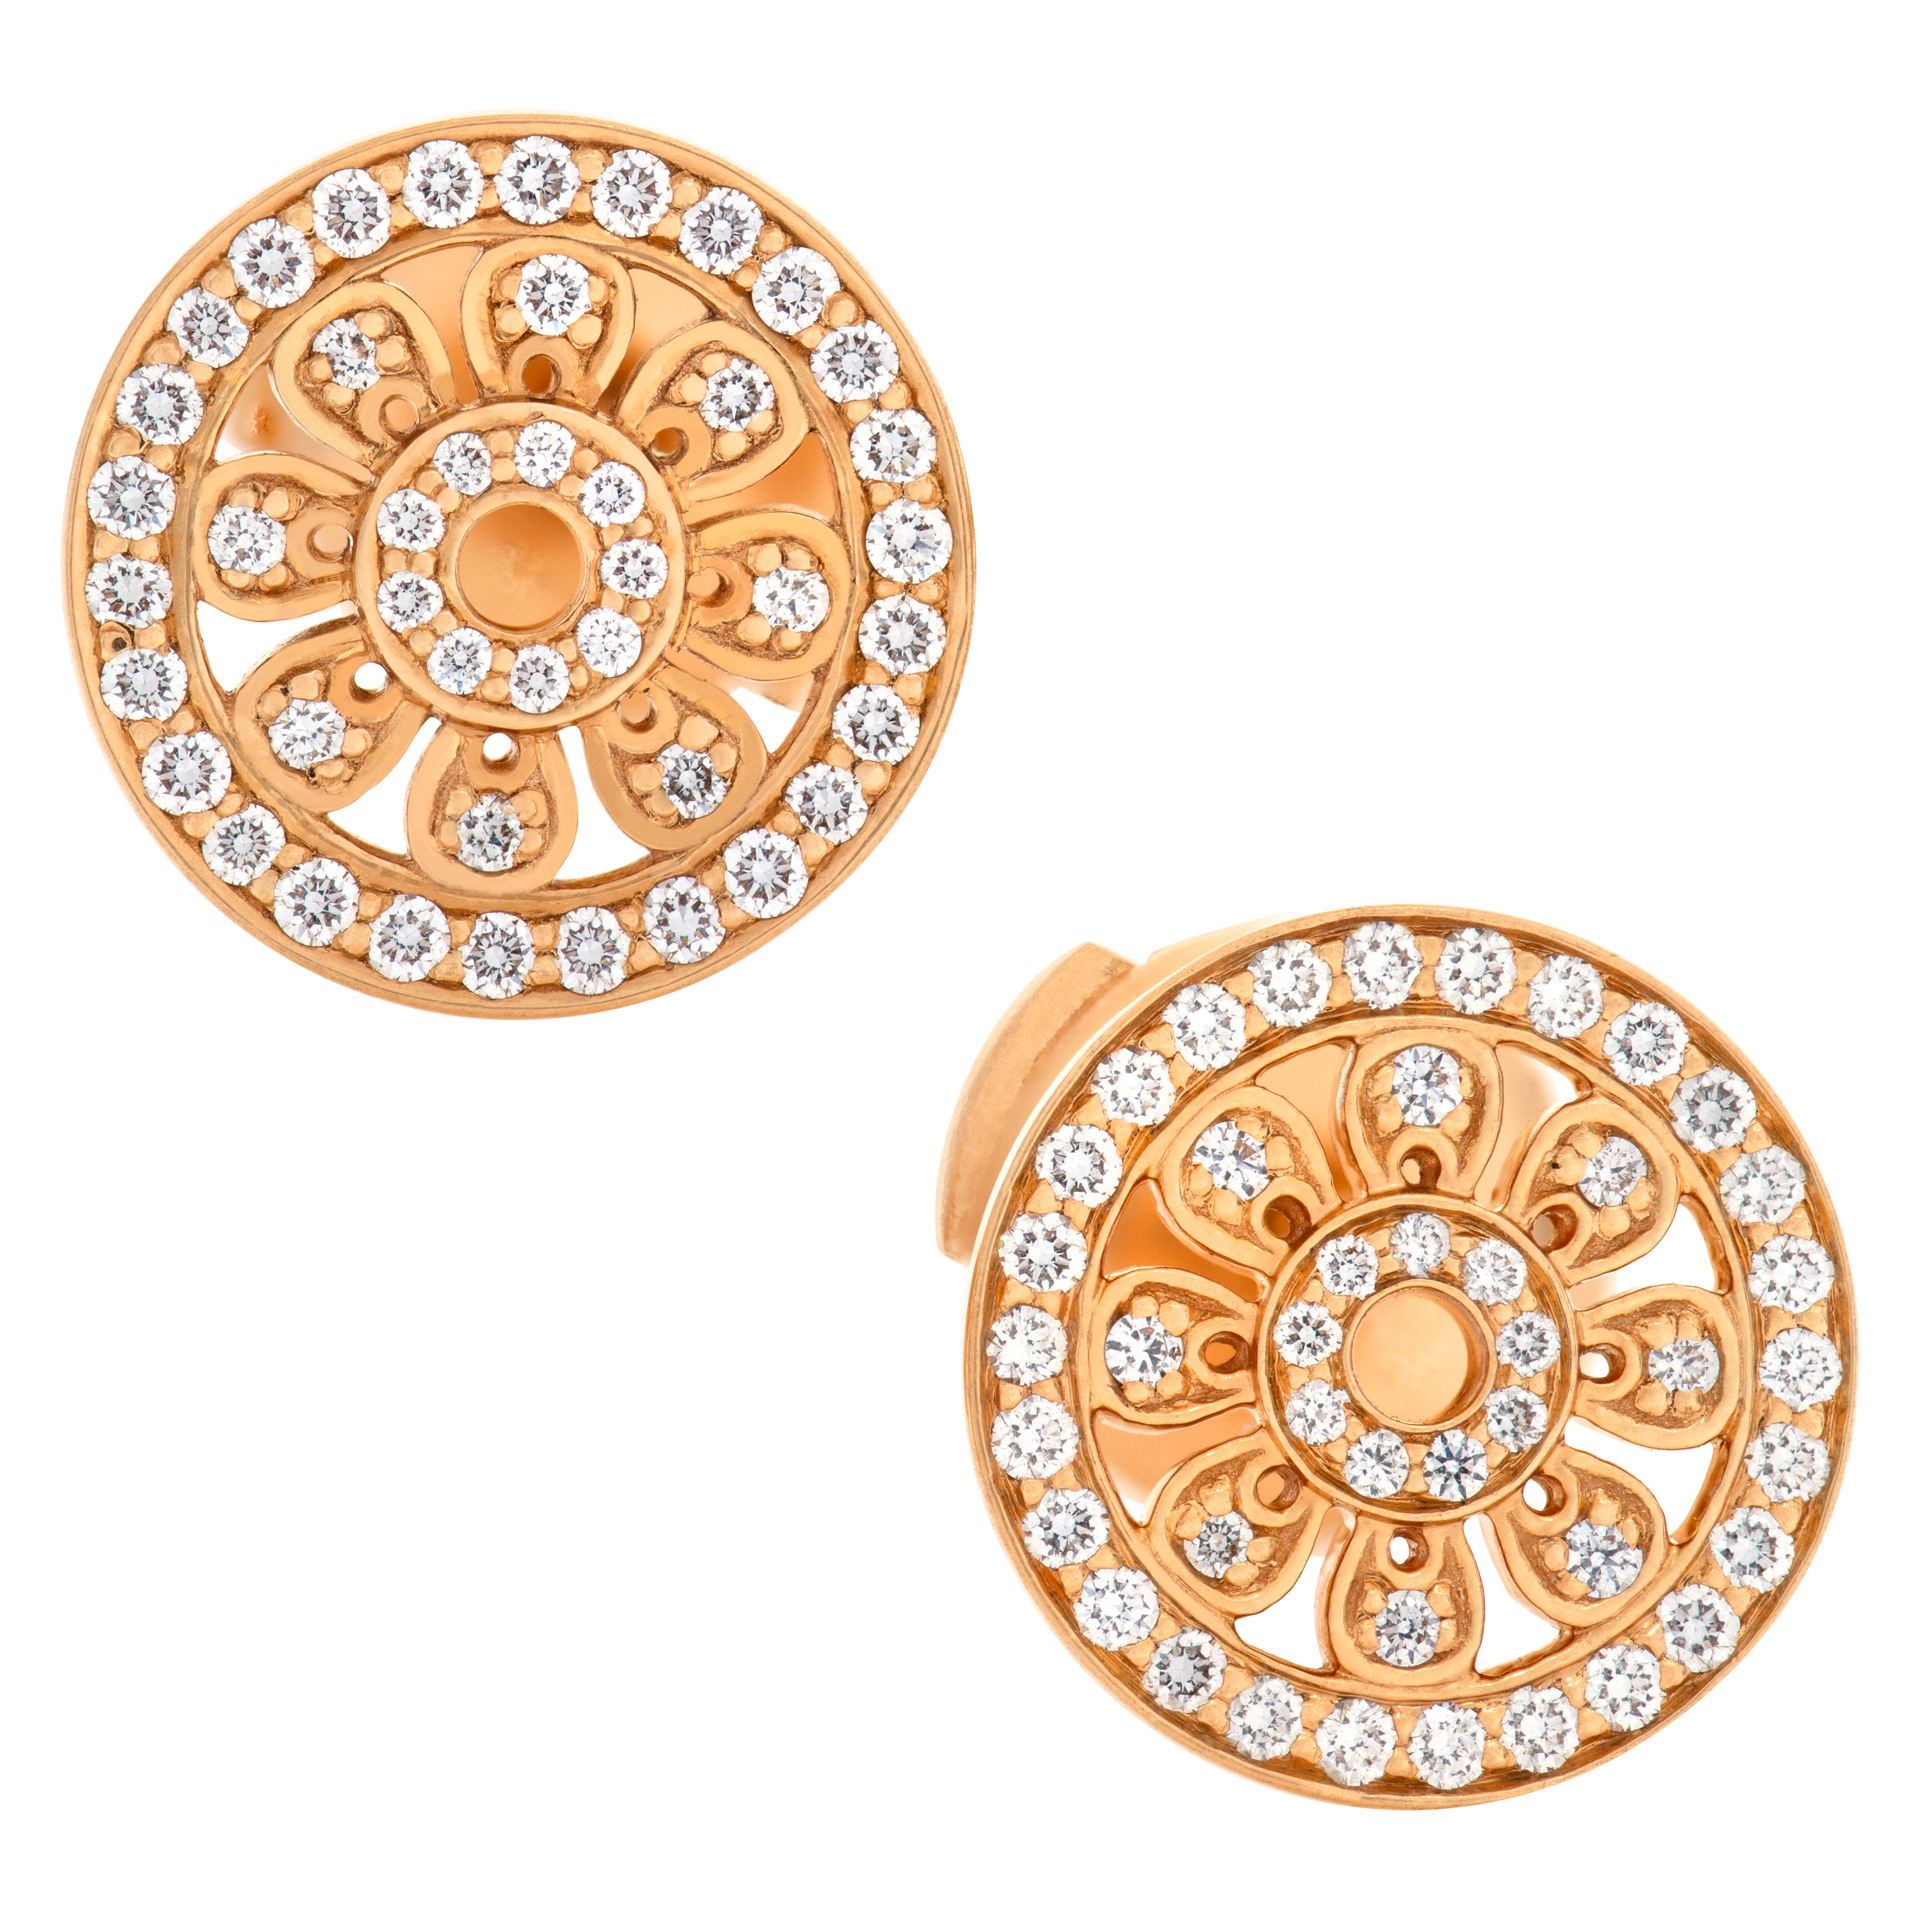 Tiffany & Co. Flower collection, Earrings stud in 18k Rose Gold W/ Diamonds image 1